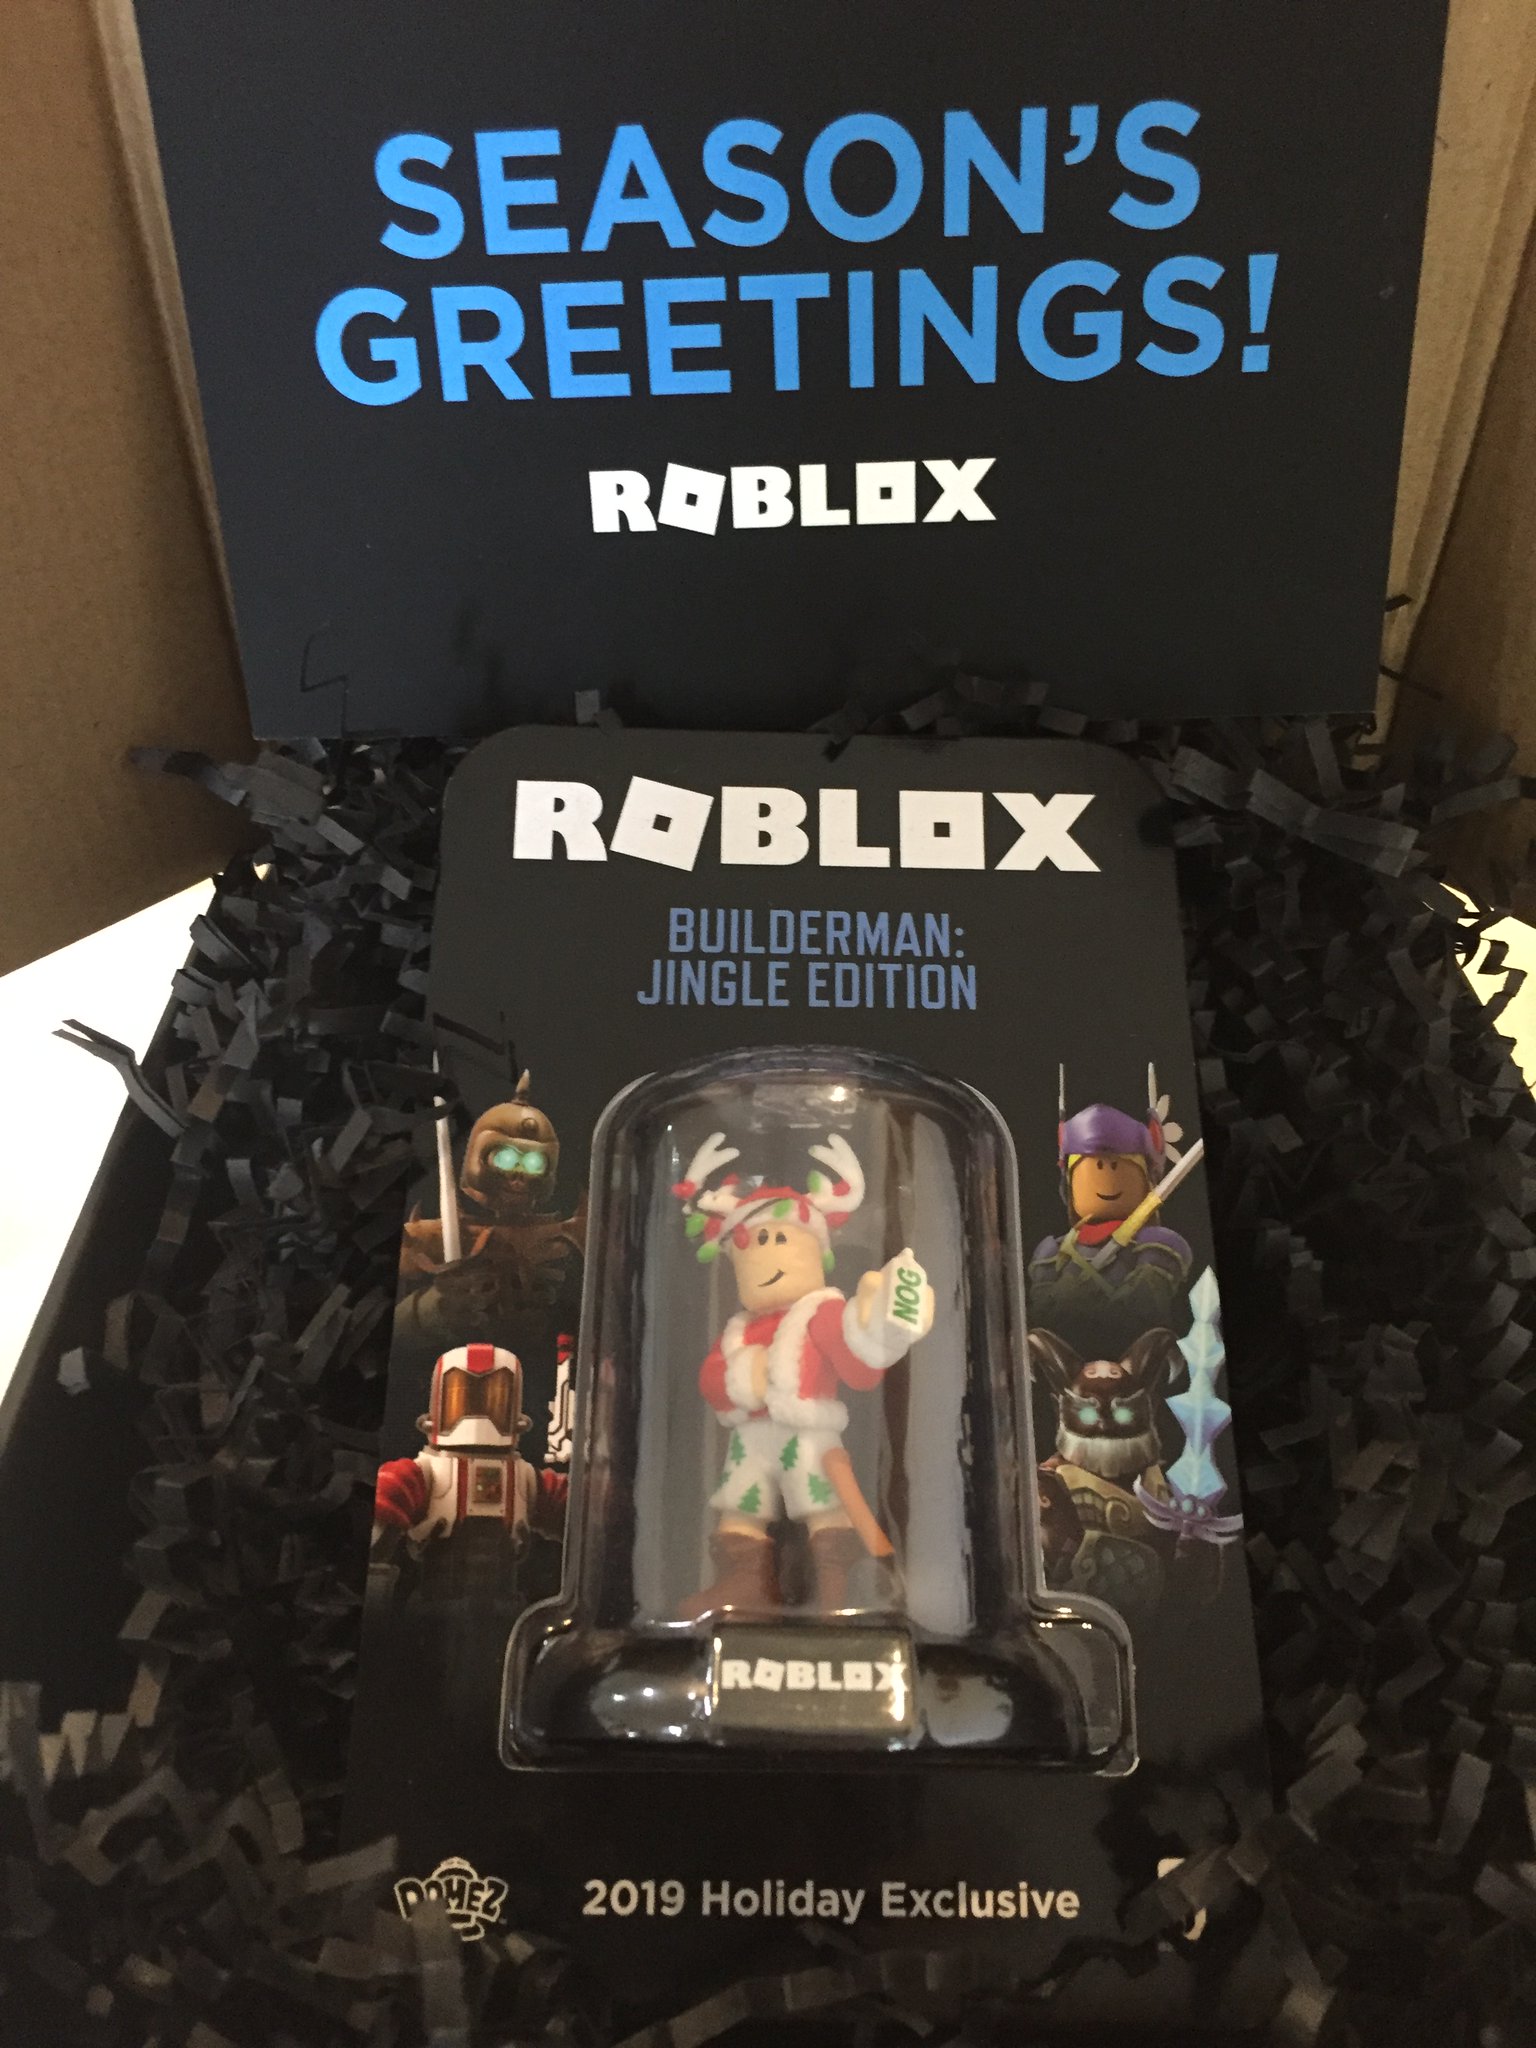 Missmudmaam On Twitter This Guy Builderman Jingle Edition Just Arrived On My Doorstep All The Way Down Under In Australia That Was Quite A Journey Thank You So Much Roblox - builderman real roblox account password 2019